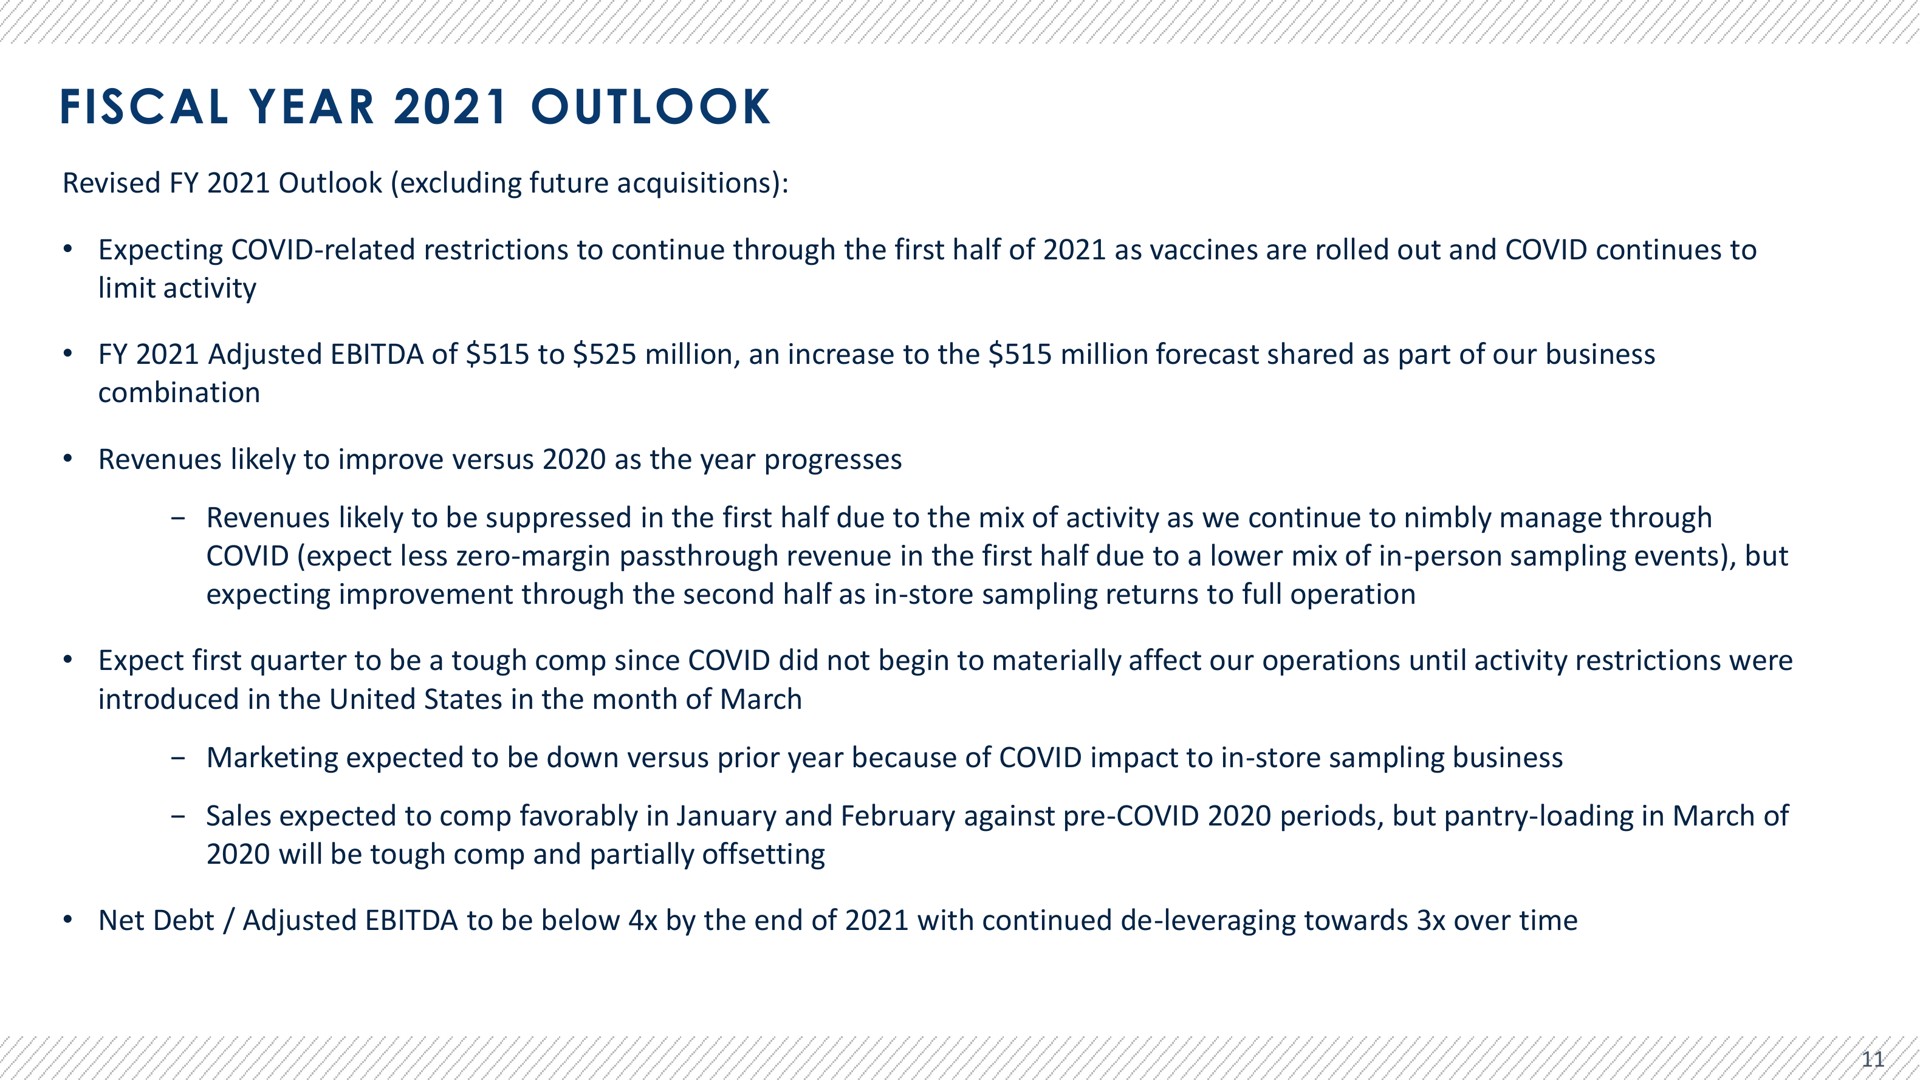 fiscal year outlook revised outlook excluding future acquisitions expecting covid related restrictions to continue through the first half of as vaccines are rolled out and covid continues to limit activity adjusted of to million an increase to the million forecast shared as part of our business combination revenues likely to improve versus as the year progresses revenues likely to be suppressed in the first half due to the mix of activity as we continue to nimbly manage through covid expect less zero margin revenue in the first half due to a lower mix of in person sampling events but expecting improvement through the second half as in store sampling returns to full operation expect first quarter to be a tough since covid did not begin to materially affect our operations until activity restrictions were introduced in the united states in the month of march marketing expected to be down versus prior year because of covid impact to in store sampling business sales expected to favorably in and against covid periods but pantry loading in march of will be tough and partially offsetting net debt adjusted to be below by the end of with continued leveraging towards over time | Advantage Solutions